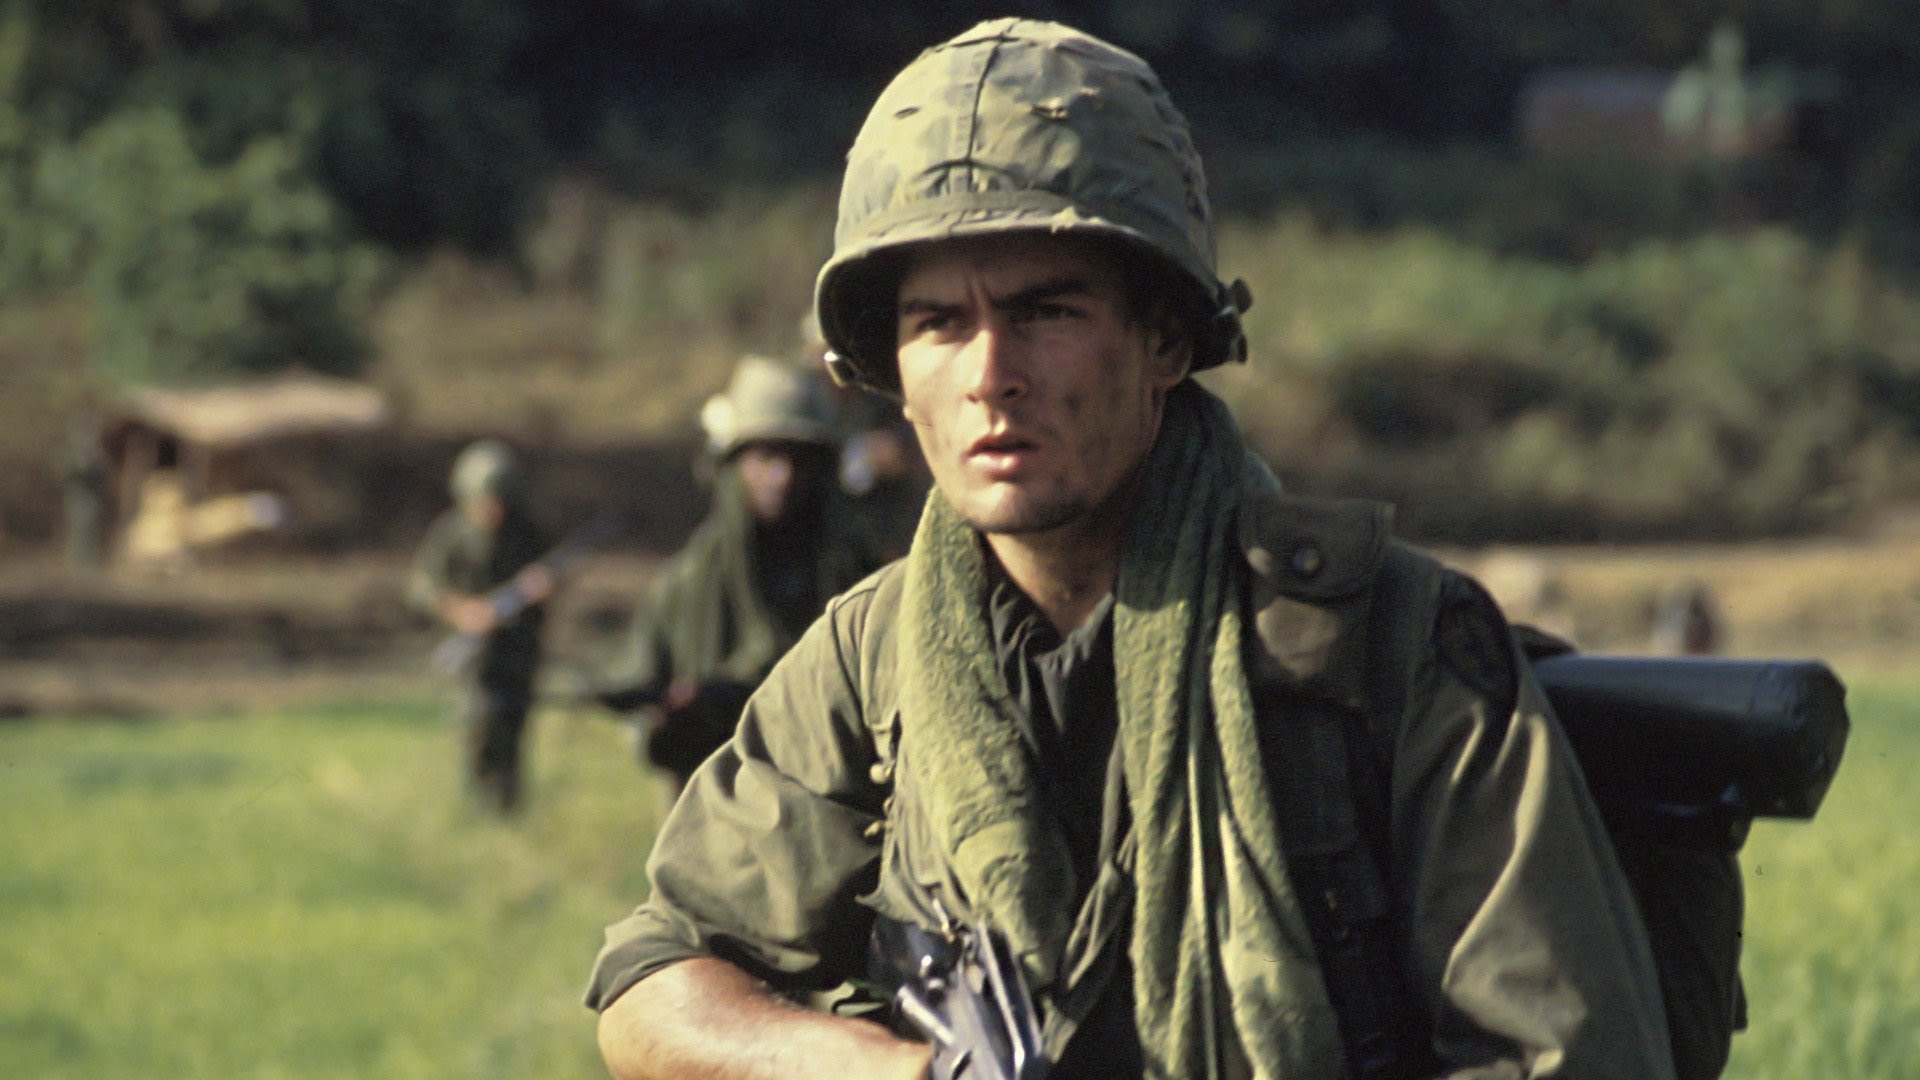 Platoon (1986): Where to Watch and Stream Online